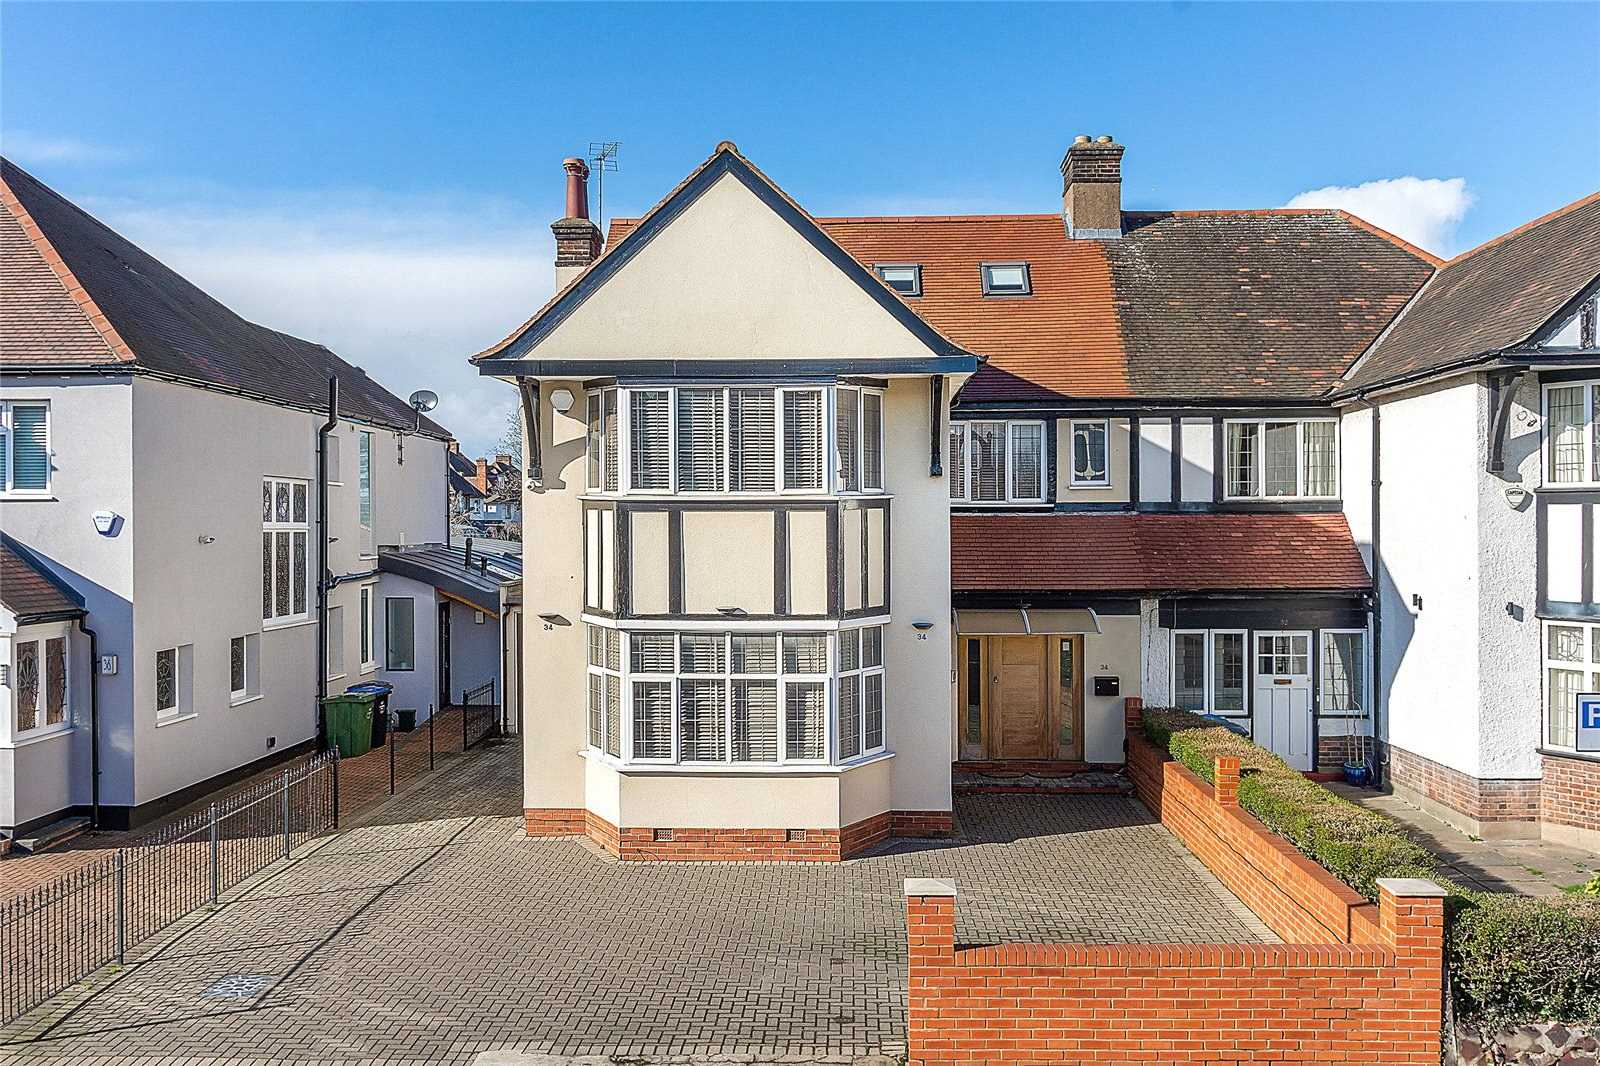 House in Willesden, Sidmouth Road 11526984